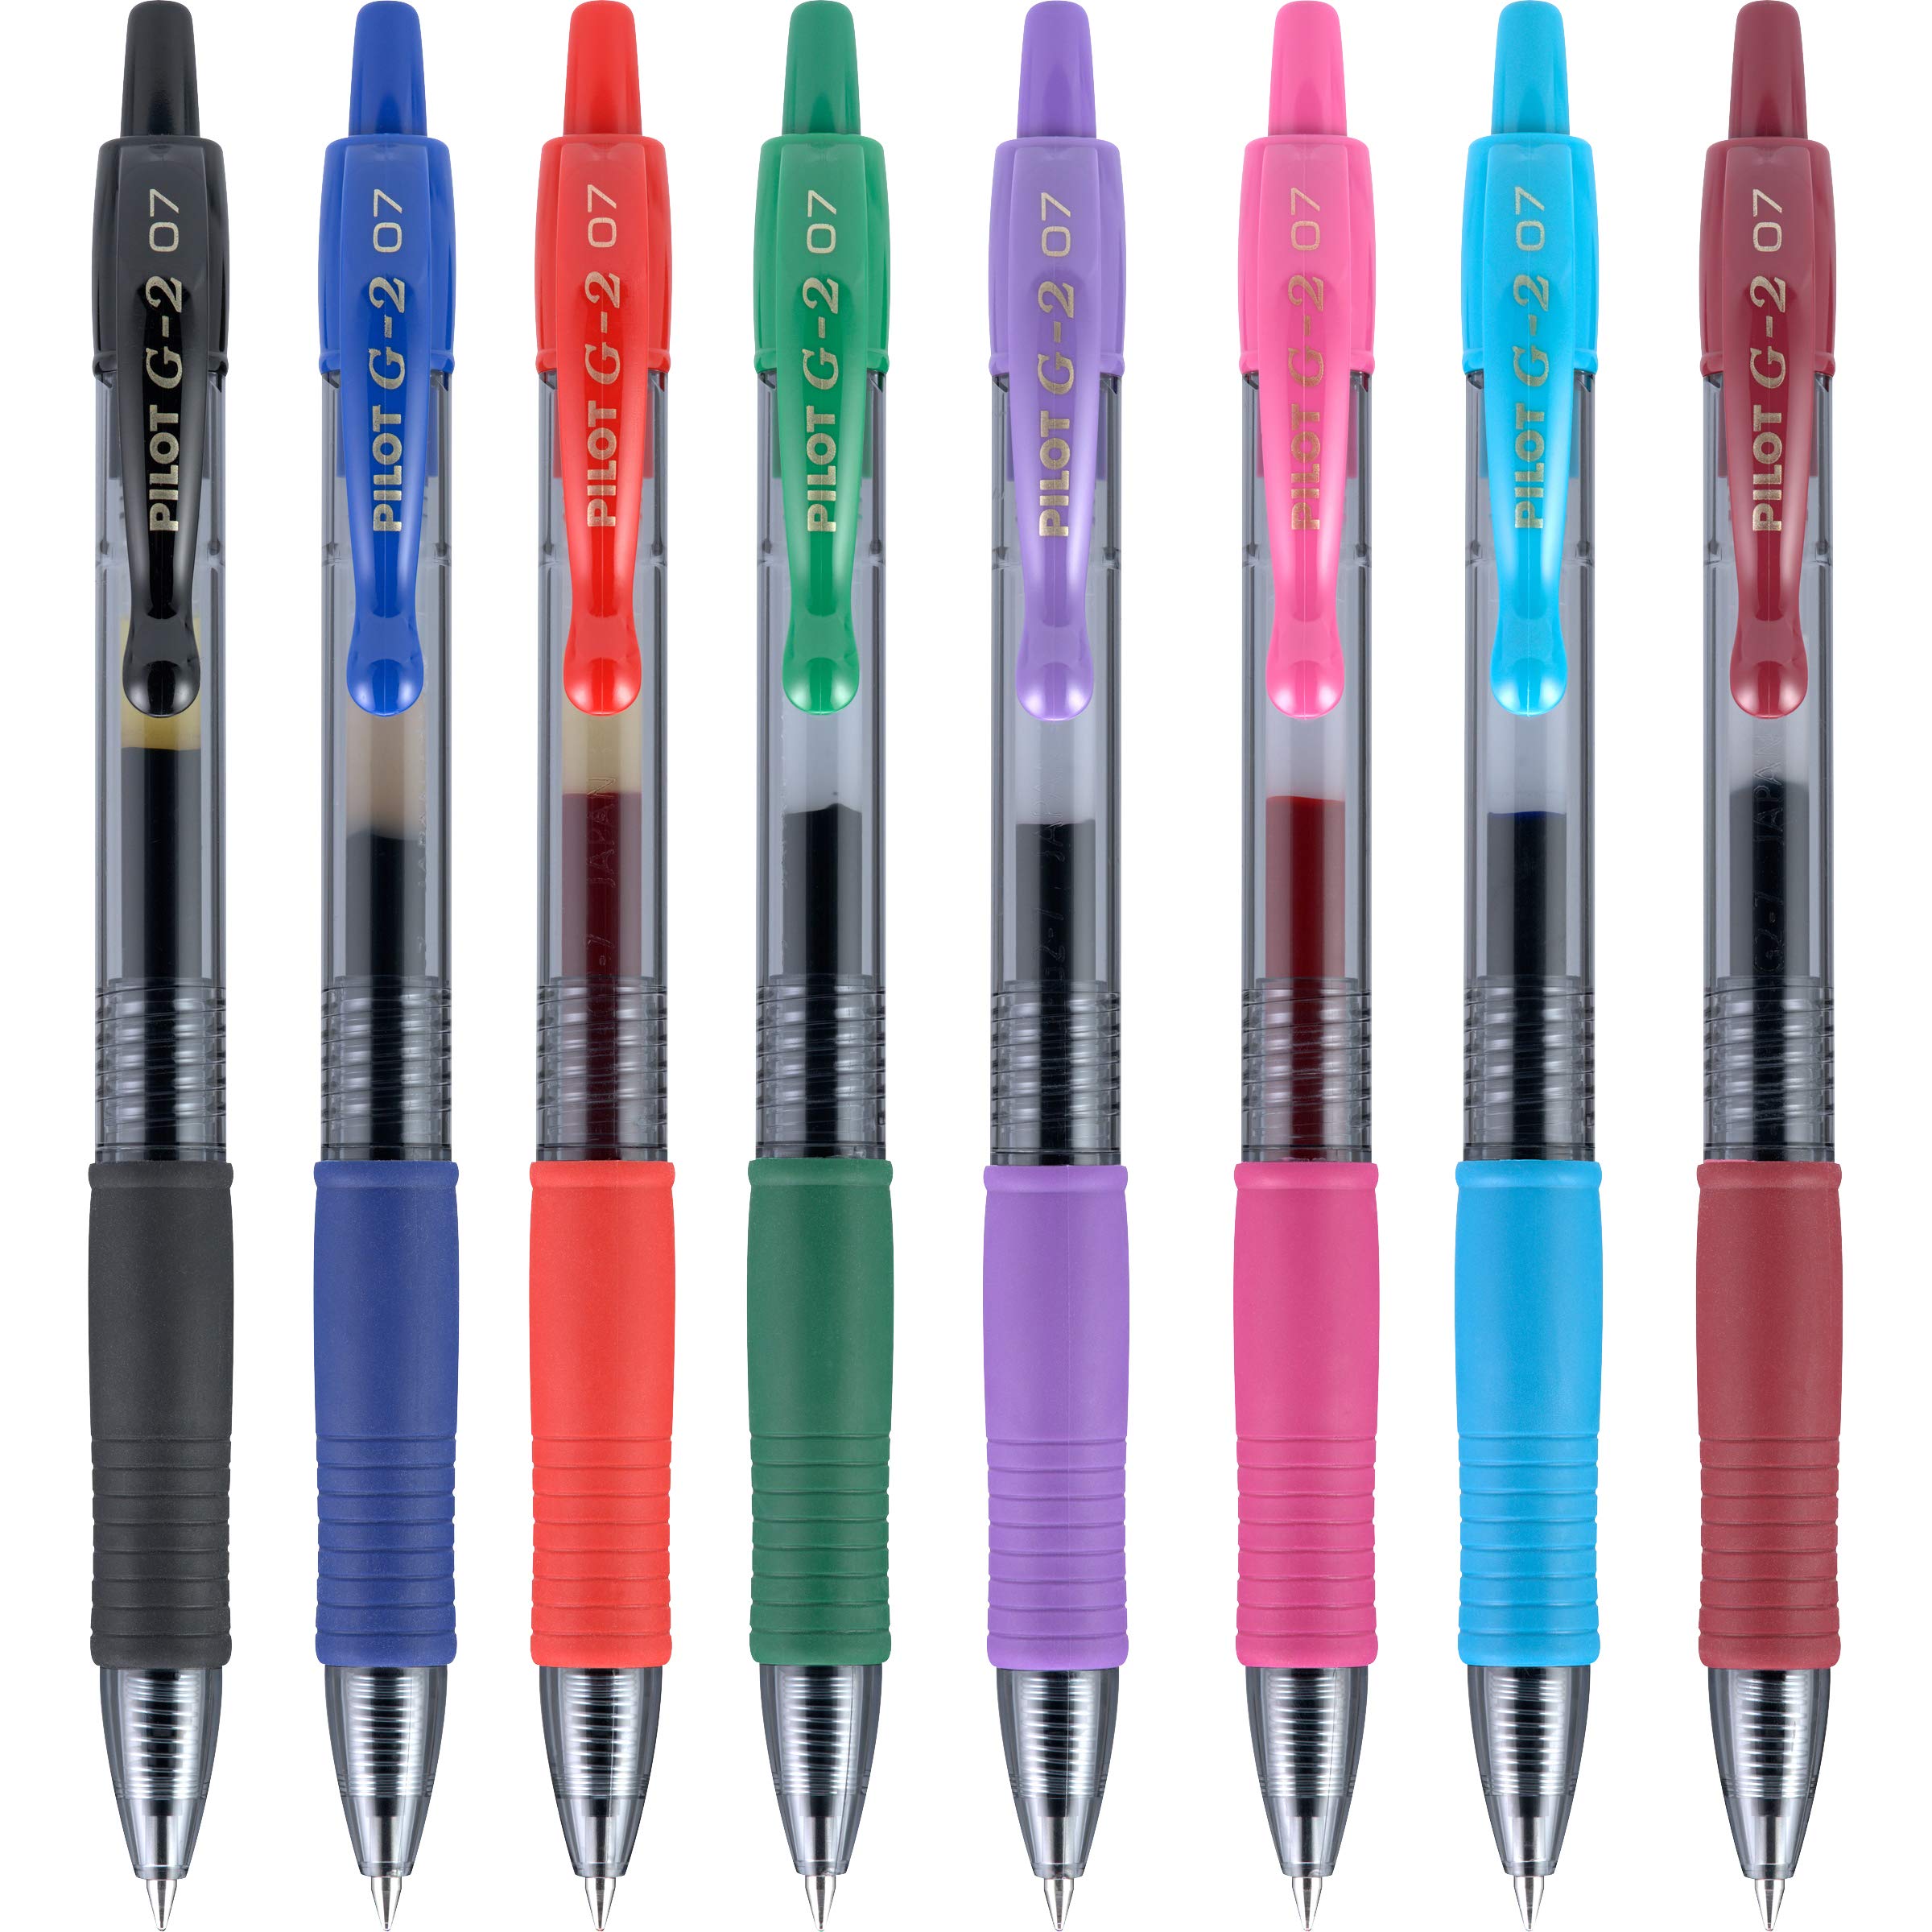 PILOT G2 Premium Refillable and Retractable Rolling Ball Gel Pens, Fine Point, Assorted Color Inks, 8-Pack Pouch (31128)